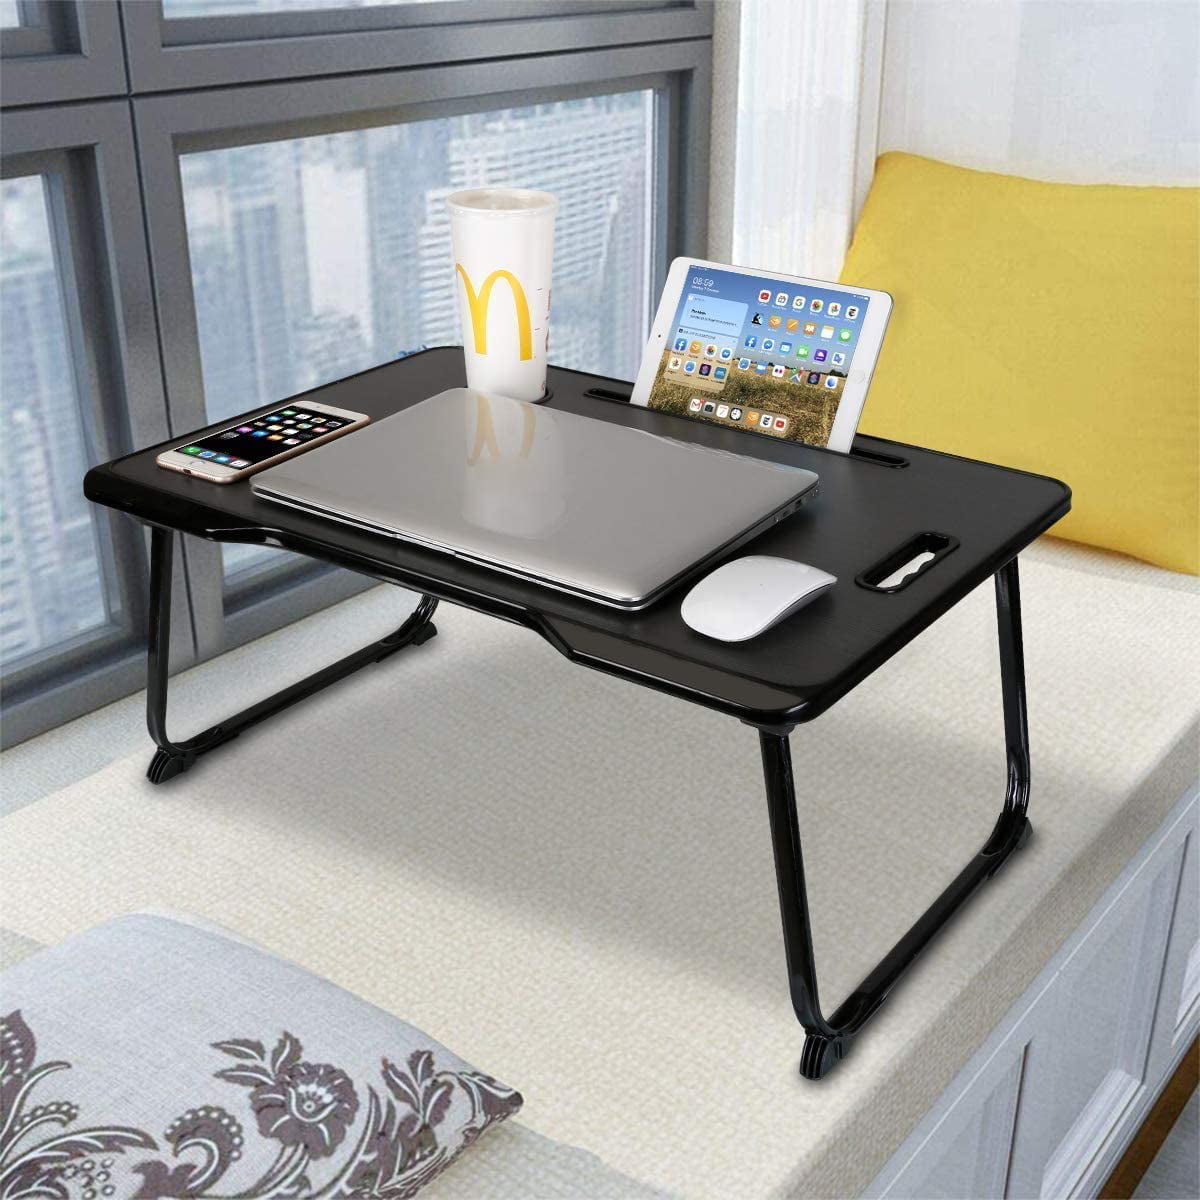 A Bed Desk Portable Tray Laptop Table Notebook Stand Reading Holder with Foldable Legs & Cup Slot Reading Book Watching Movie on Bed/Couch/Sofa 